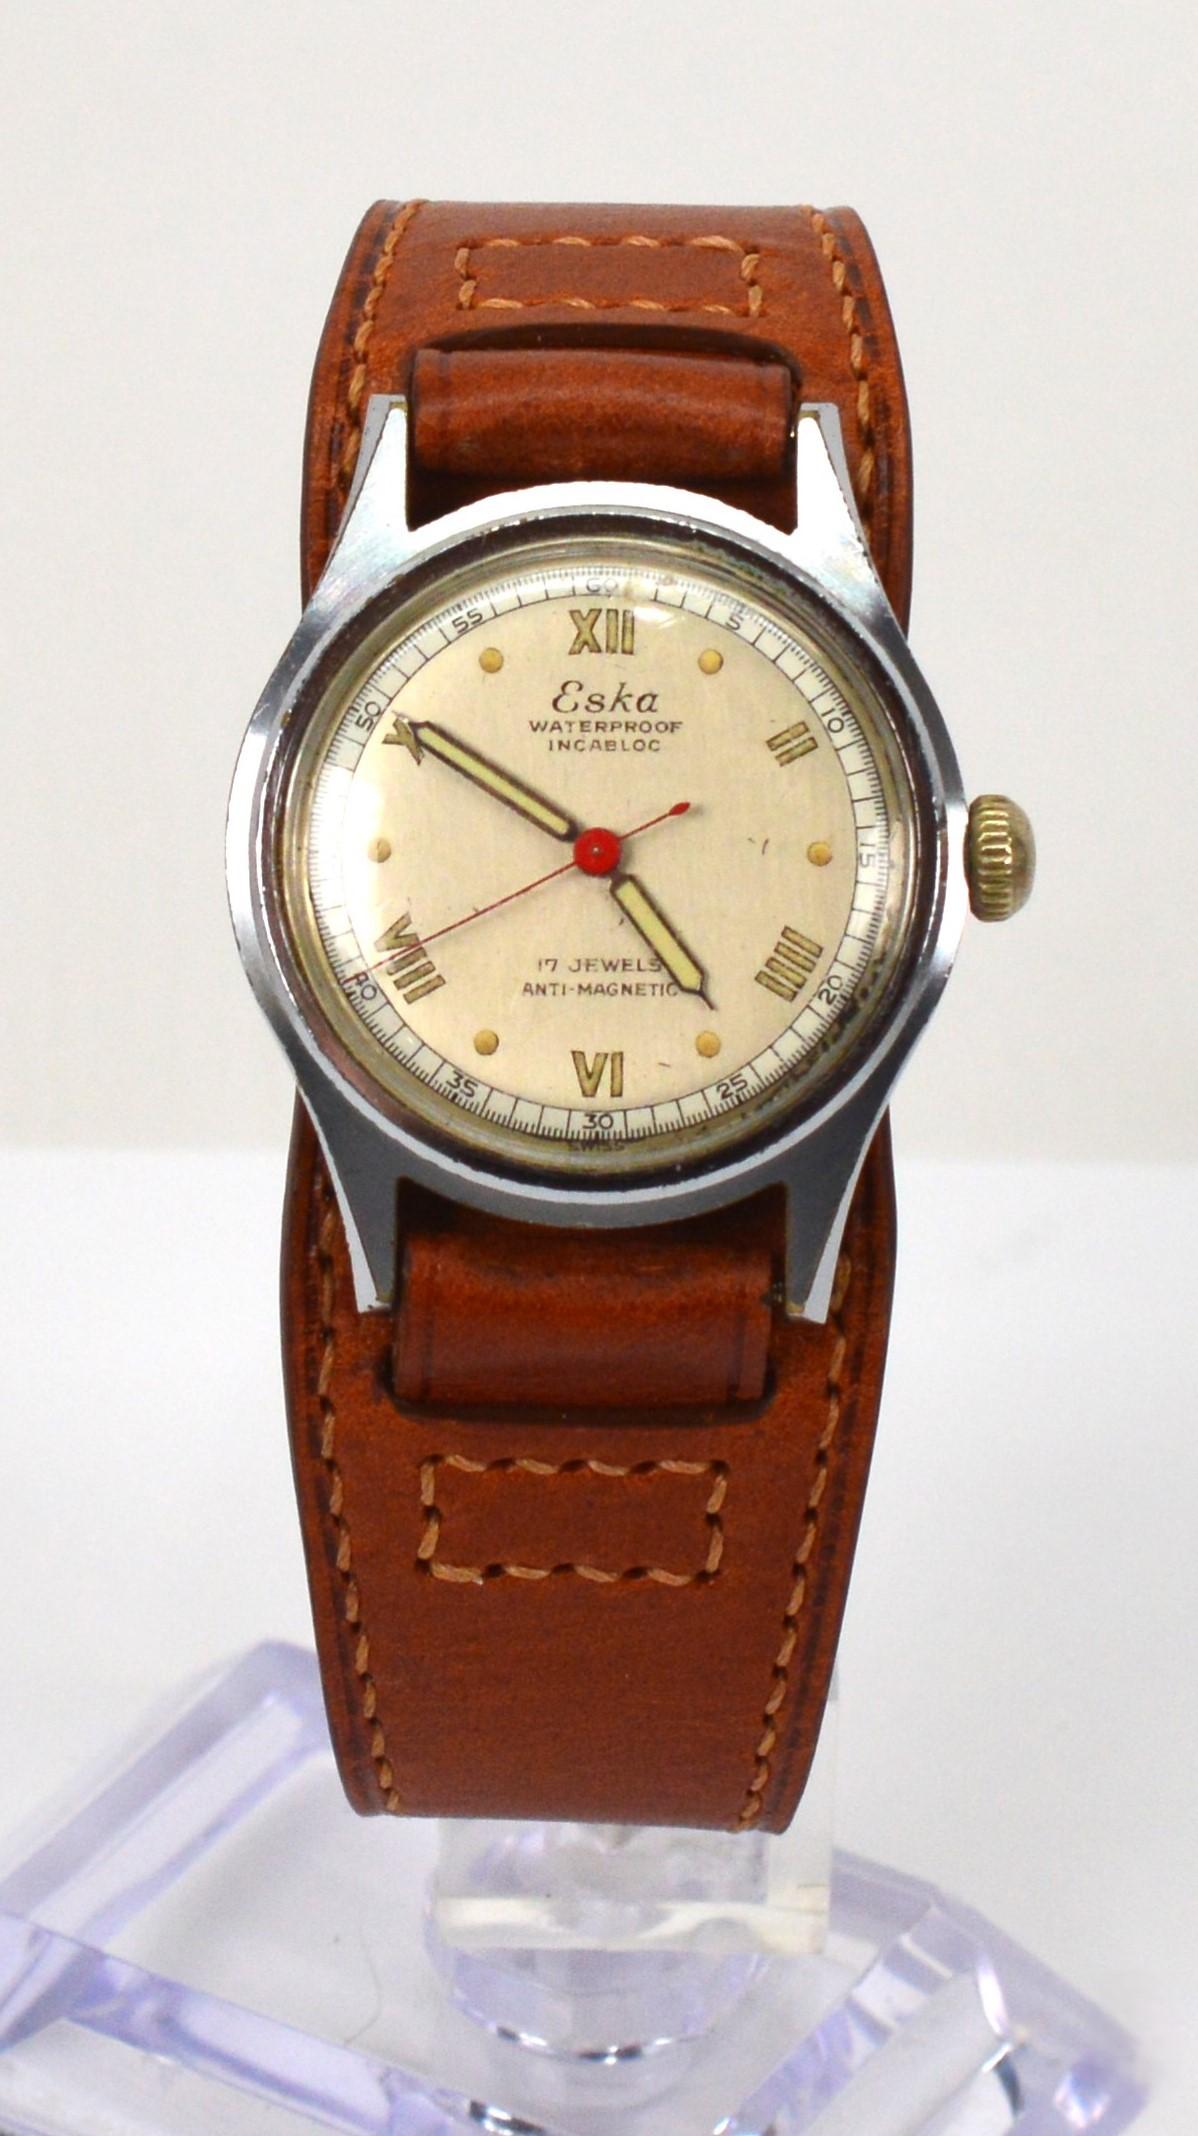 Add this great post-war, Swiss-made Eska Military Style Wrist Watch to your vintage collection. In brushed steel, this 31mm watch has its original mat silver-toned face with Roman numerals, indexes and a red second hand sweep. This Eska Watch has a